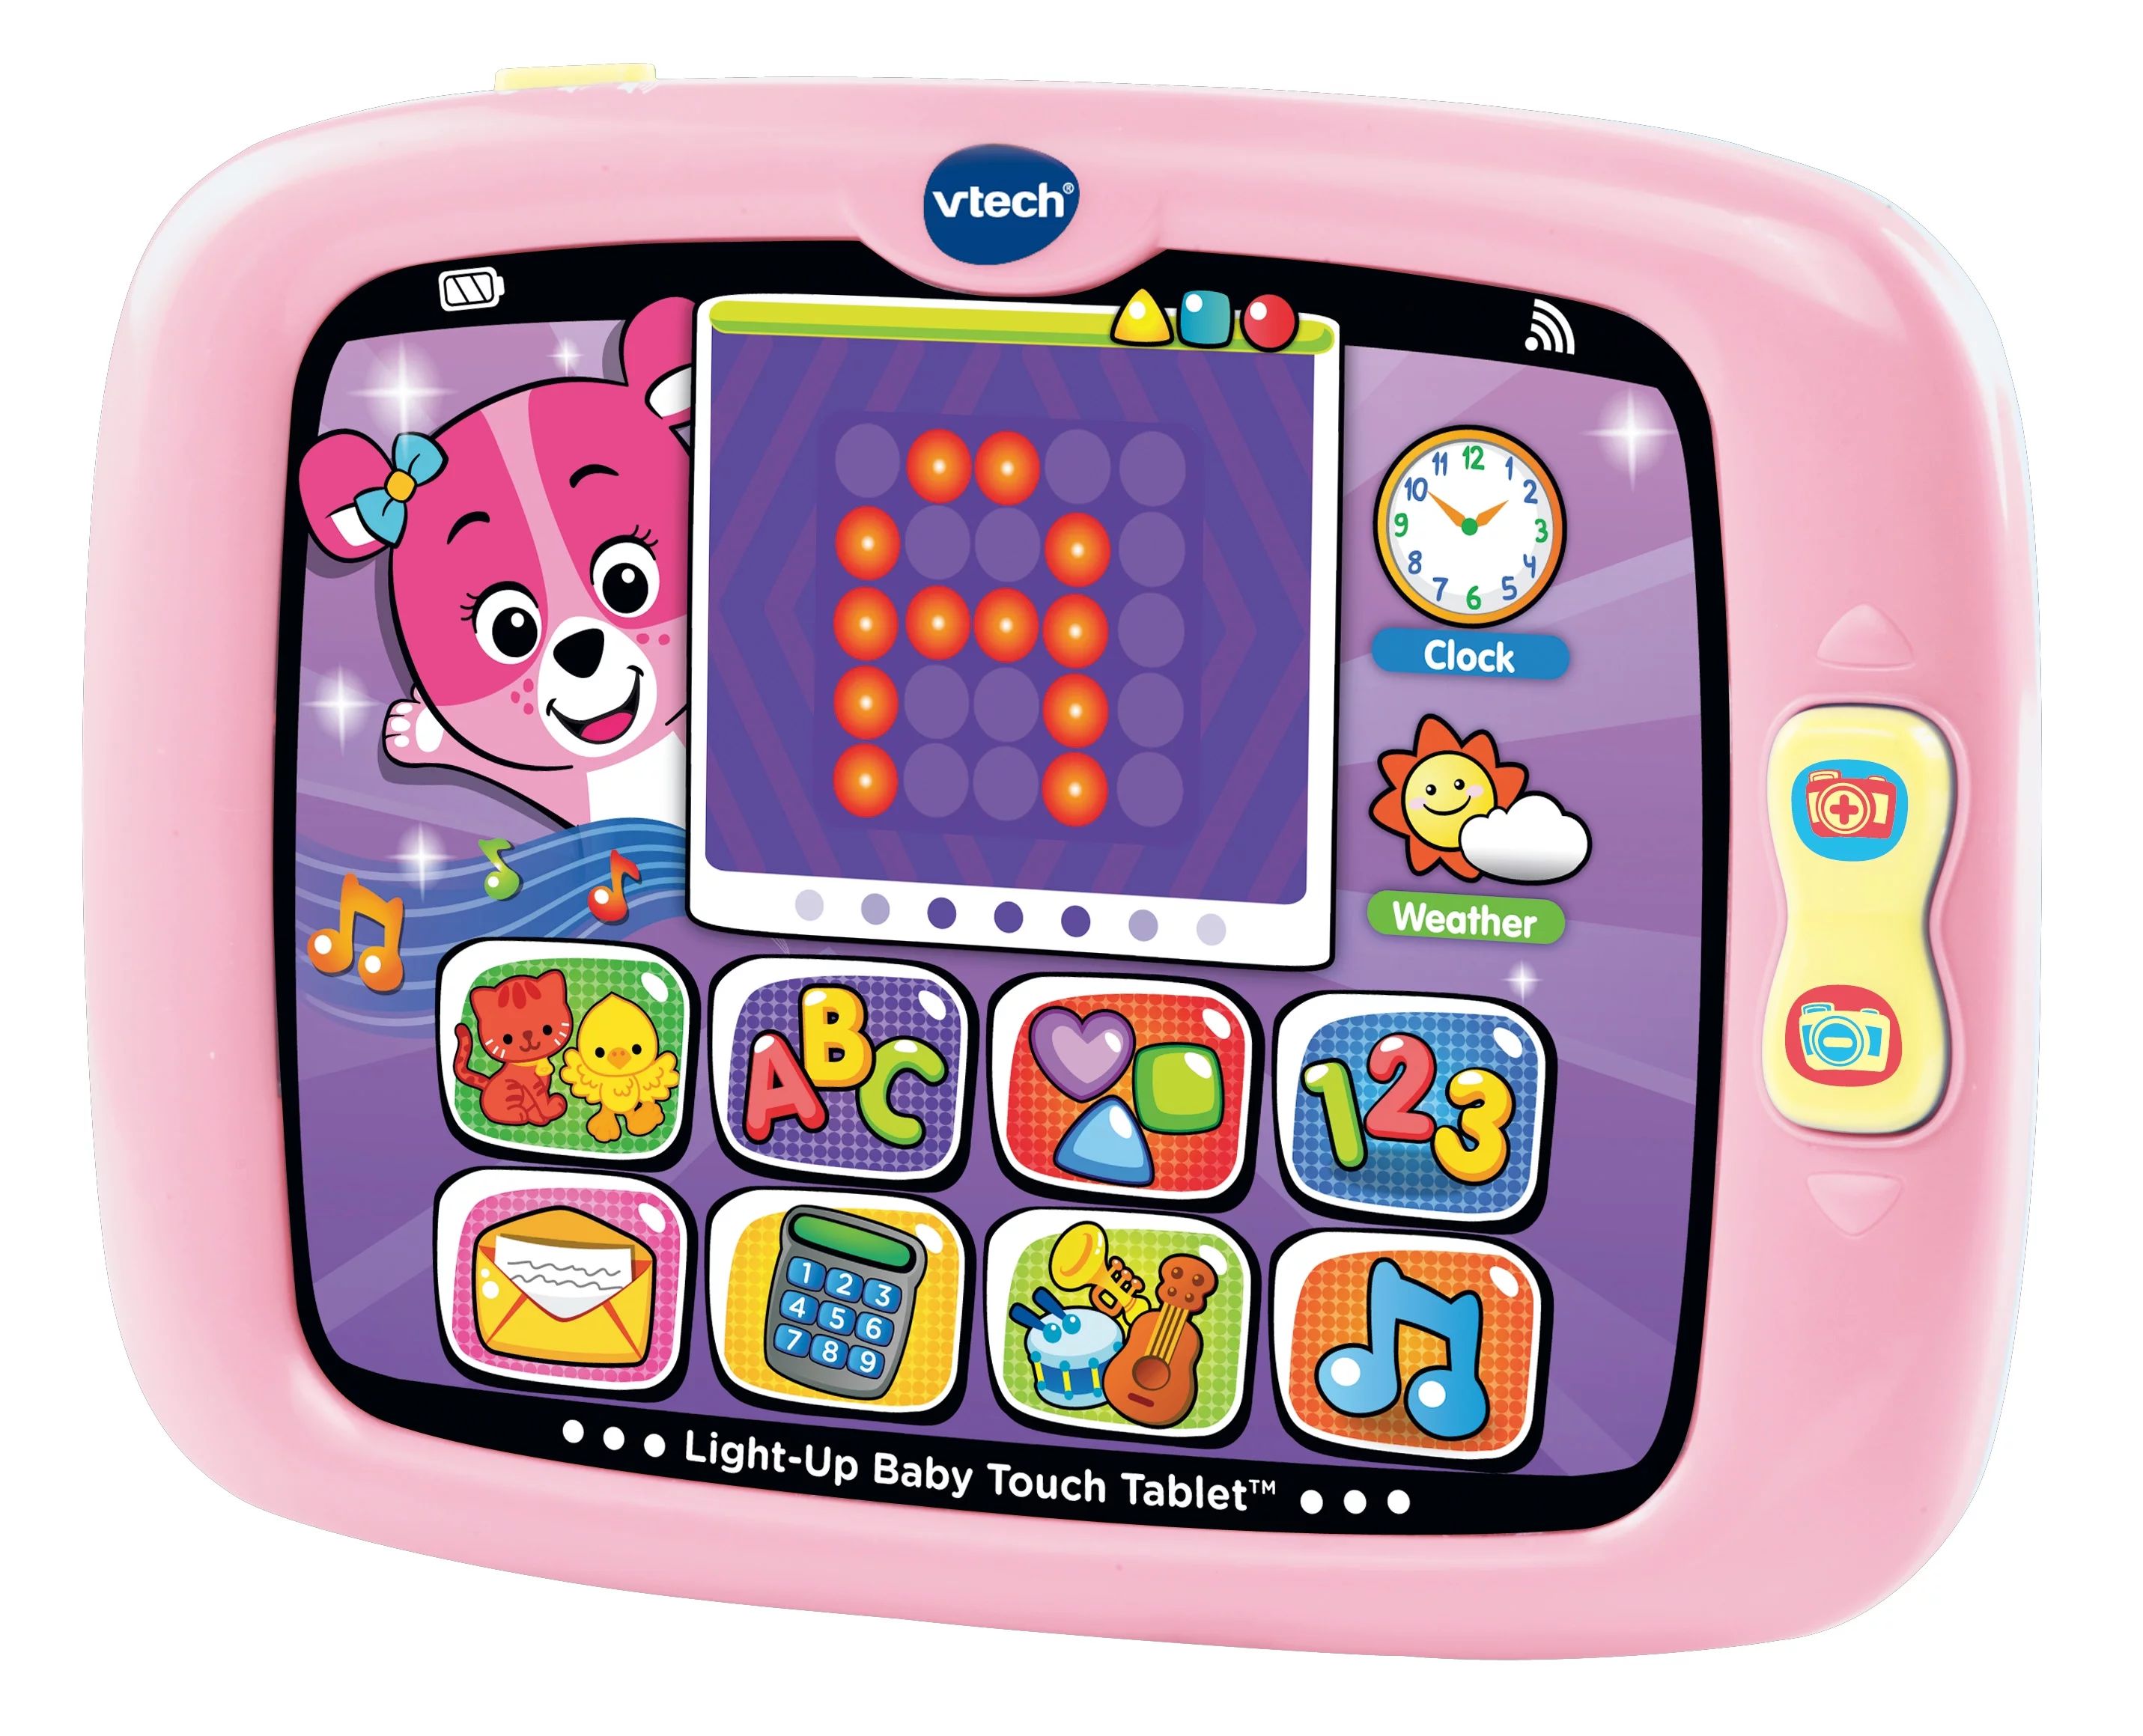 VTech Light-Up Baby Touch Tablet, Learning Toy for Baby, Pink | Walmart (US)